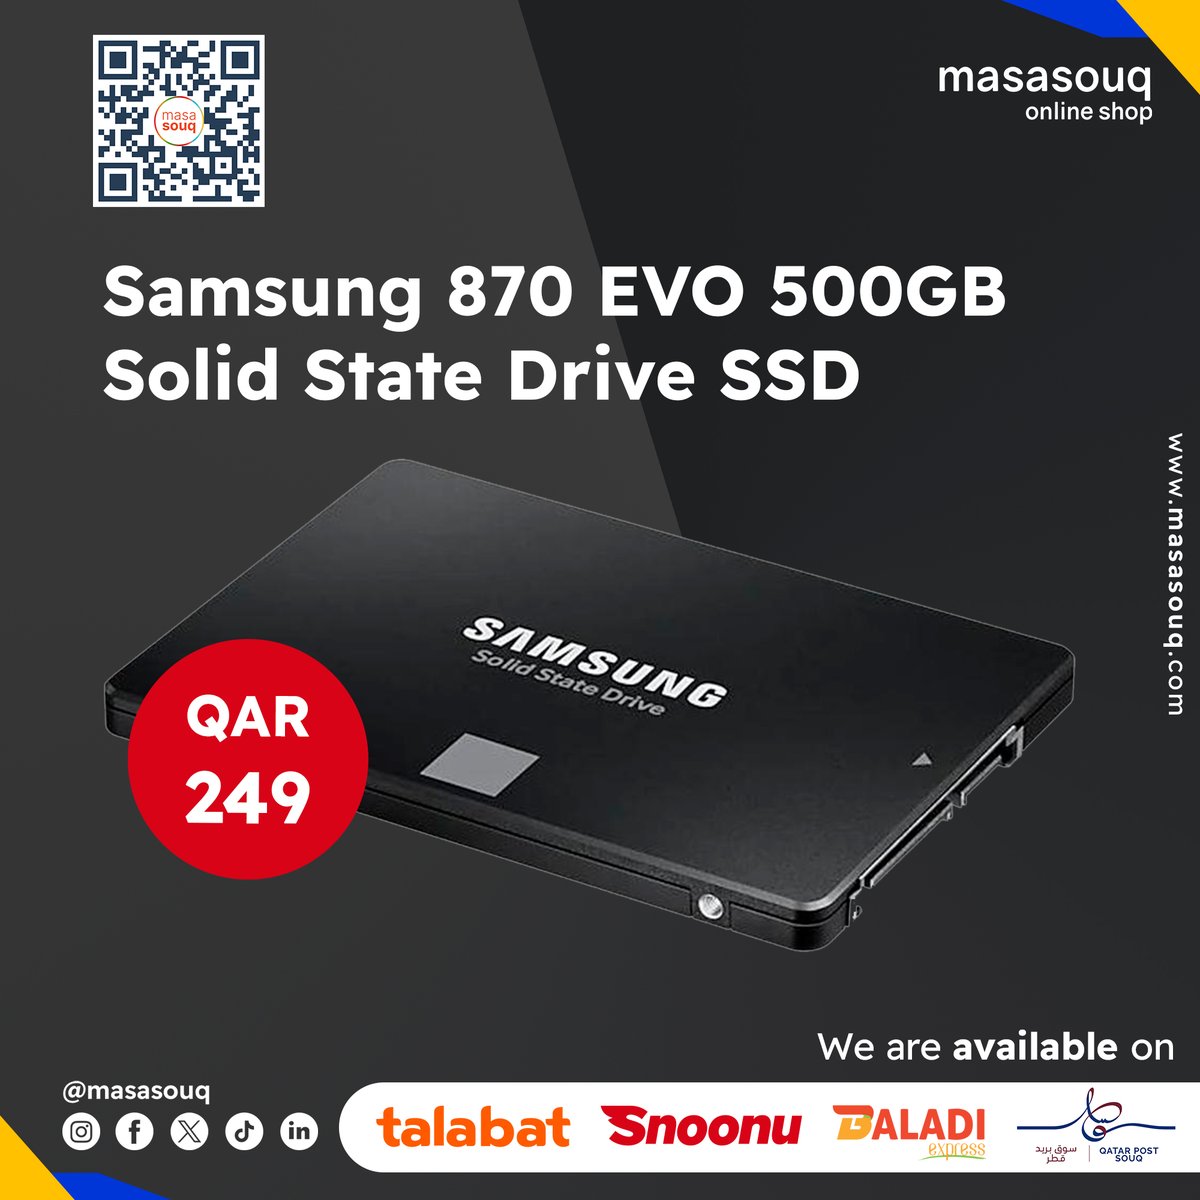 💻 Secure your data and boost your workflow with the reliable Samsung 870 EVO 500GB SSD. Get yours for QAR249: masasouq.com/samsung-870-ev… #SamsungSSD #SSD #DataStorage #Reliability #TechUpgrade #masasouq